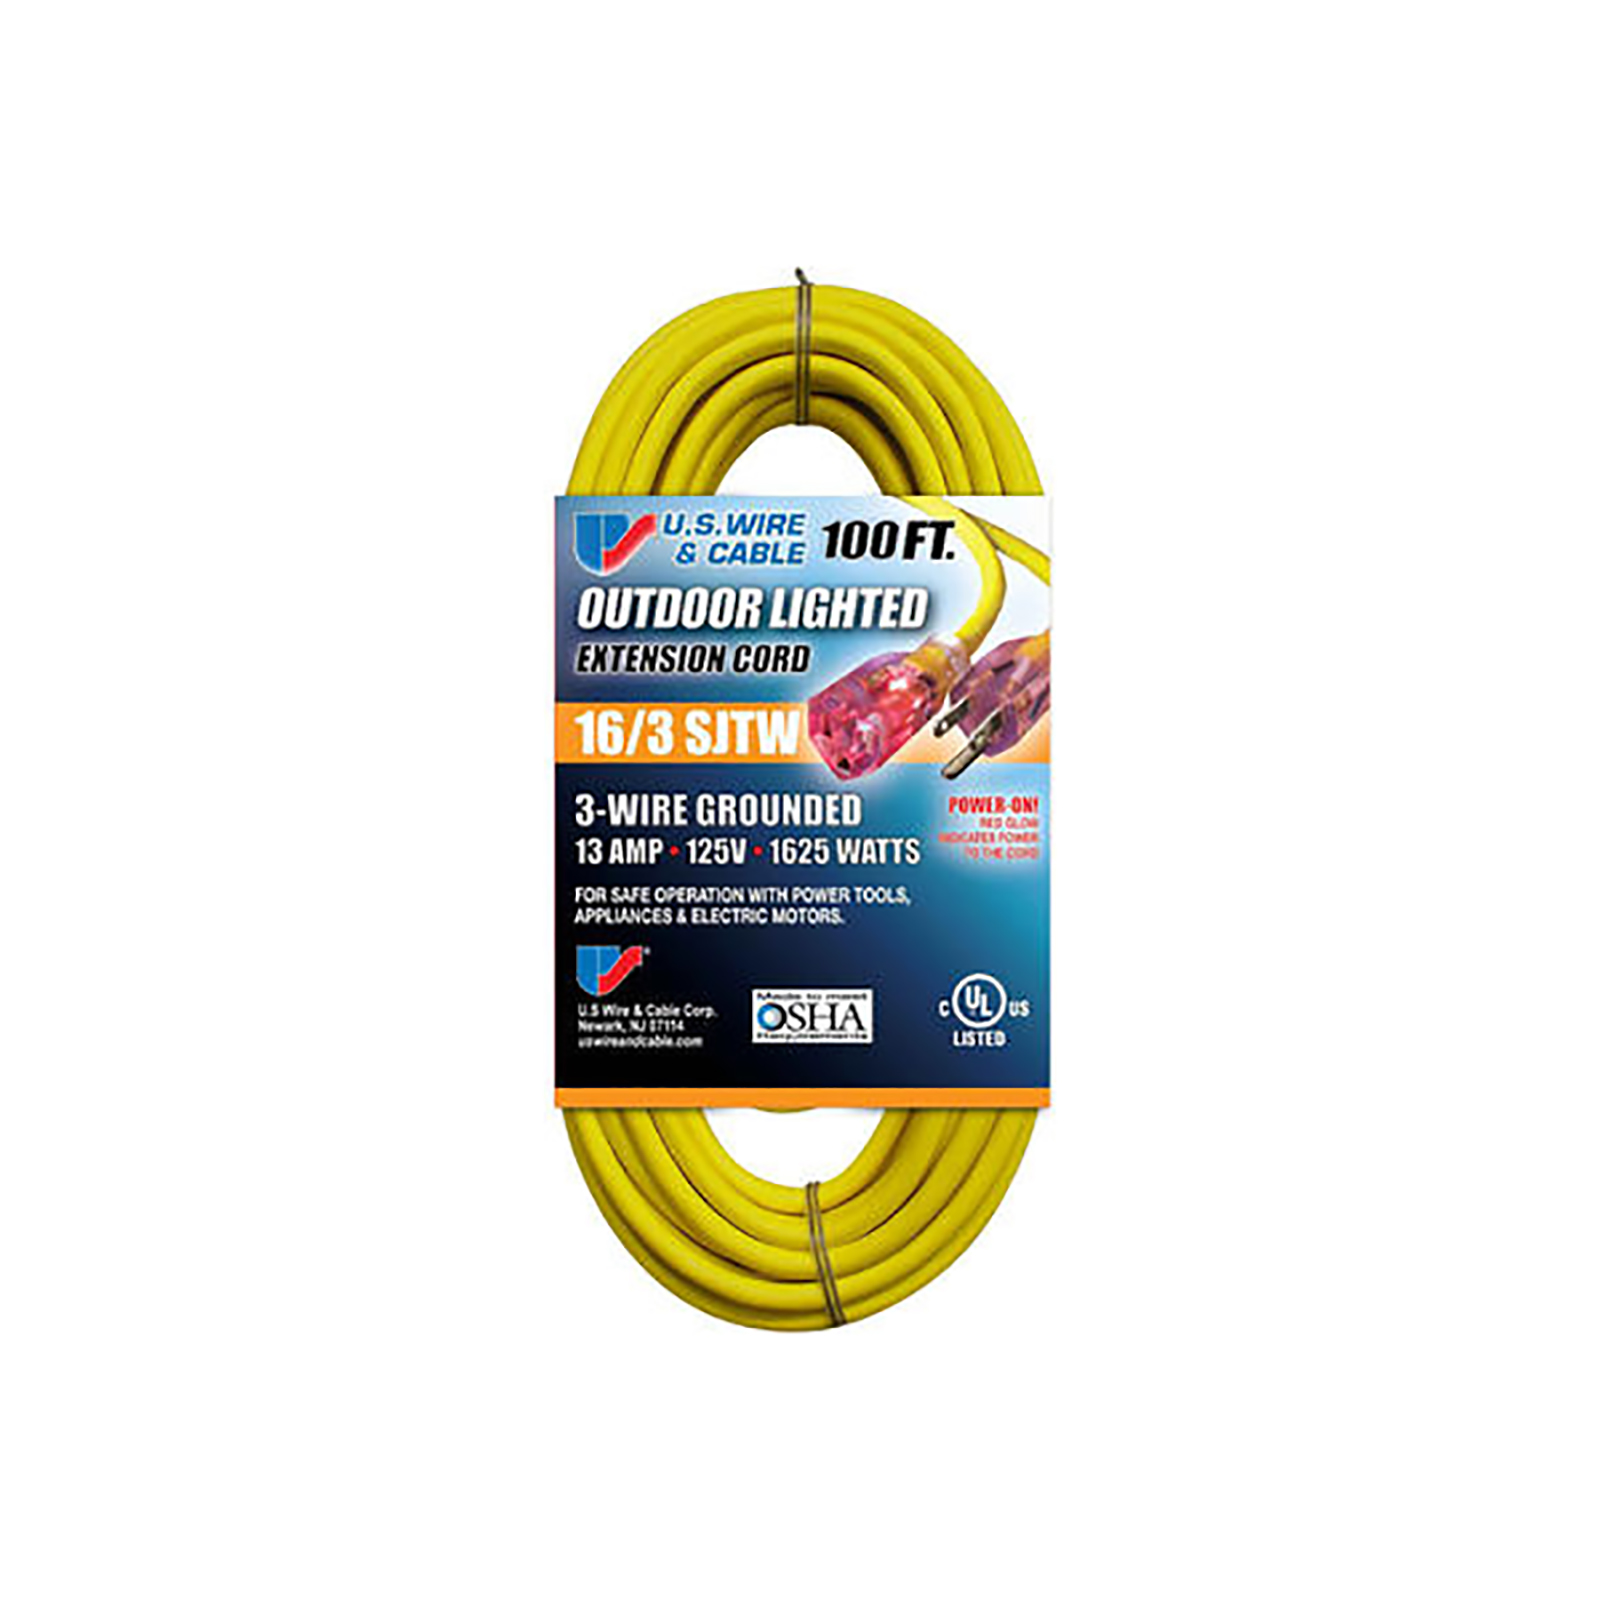 US WIRE & CABLE 100' Outdoor Lighted Extension Cord – Yellow